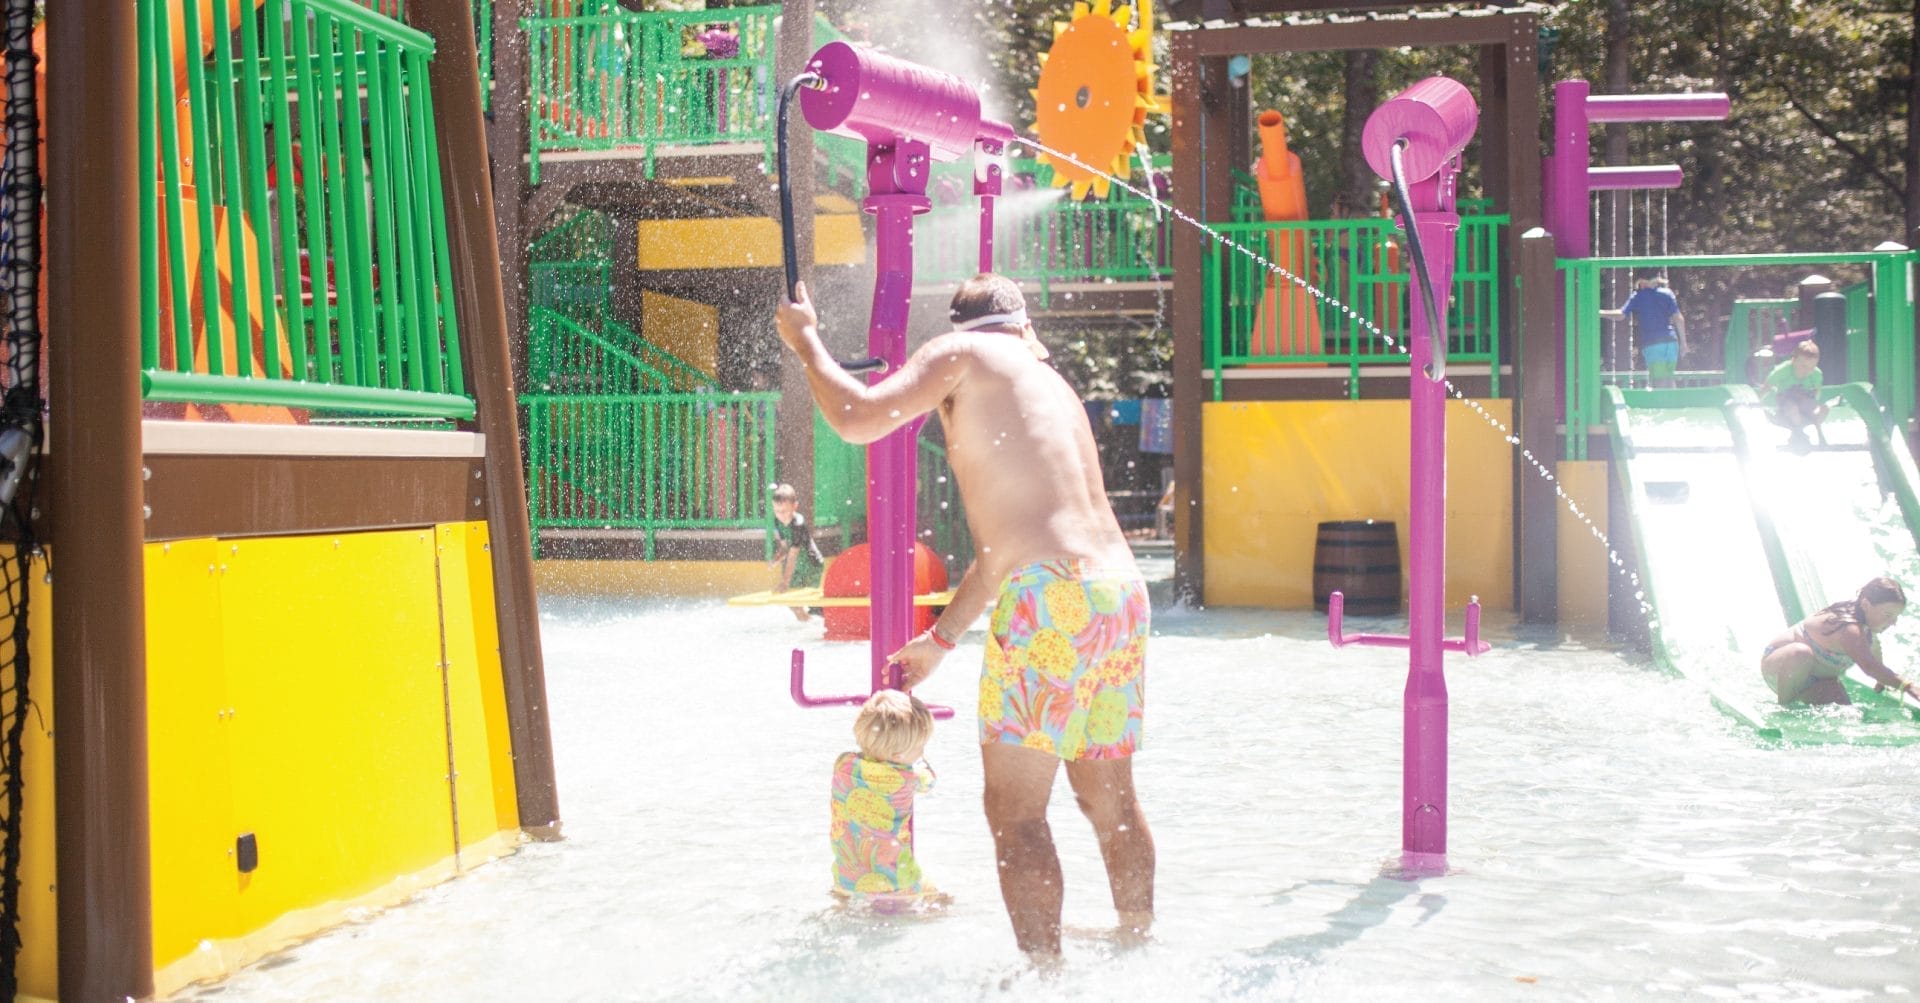 A dad and toddler activating the beanstalk blaster shooting a stream of water towards another water player at the waterpark in Bostic, North Carolina.